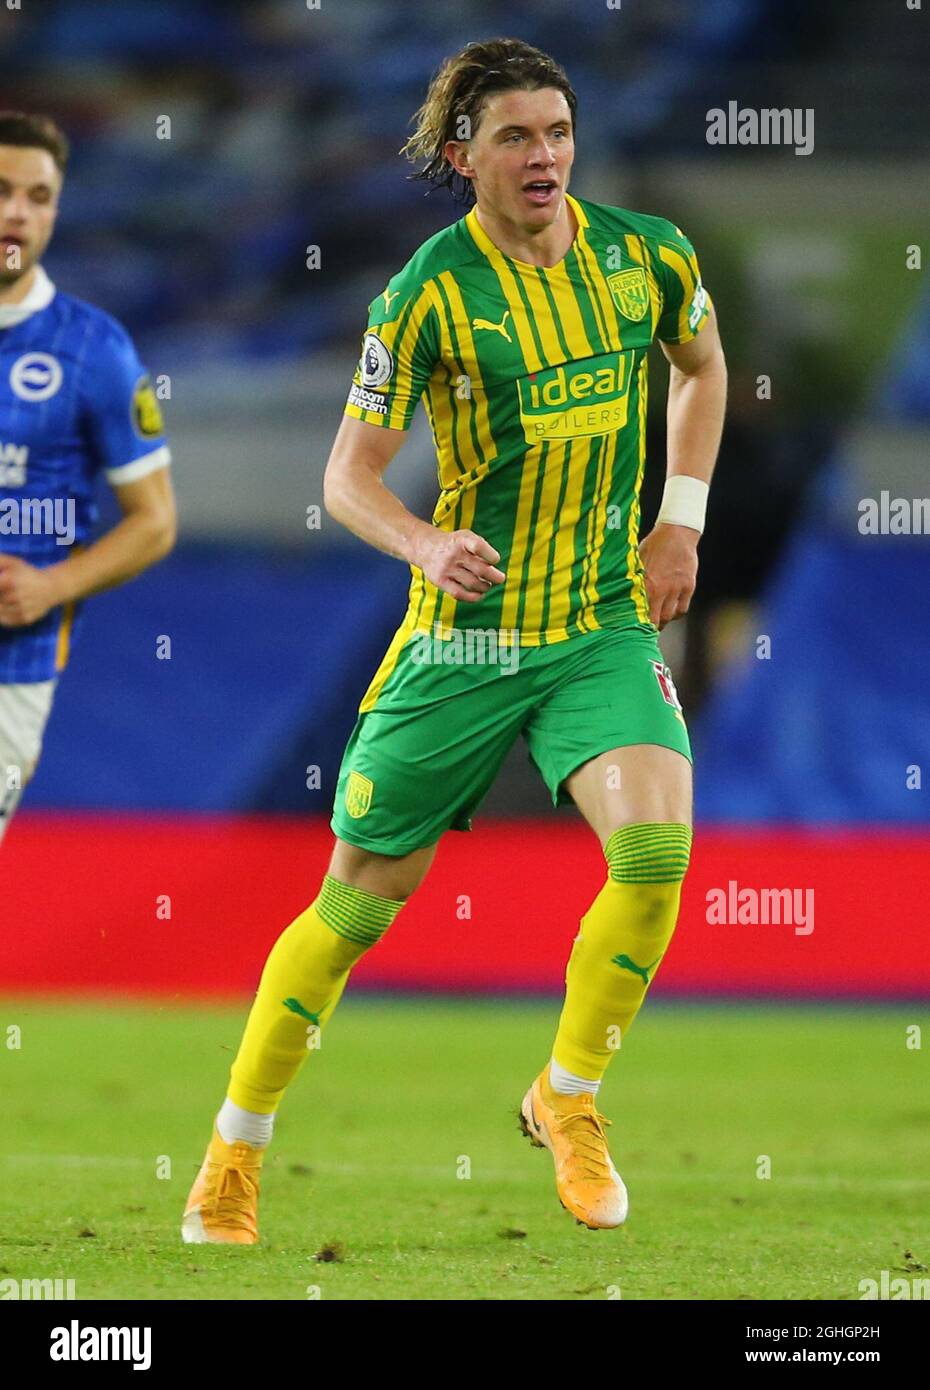 Conor Gallagher of West Brom during the Premier League match at the AMEX Stadium, Brighton and Hove. Picture date: 26th October 2020. Picture credit should read: Paul Terry/Sportimage via PA Images Stock Photo